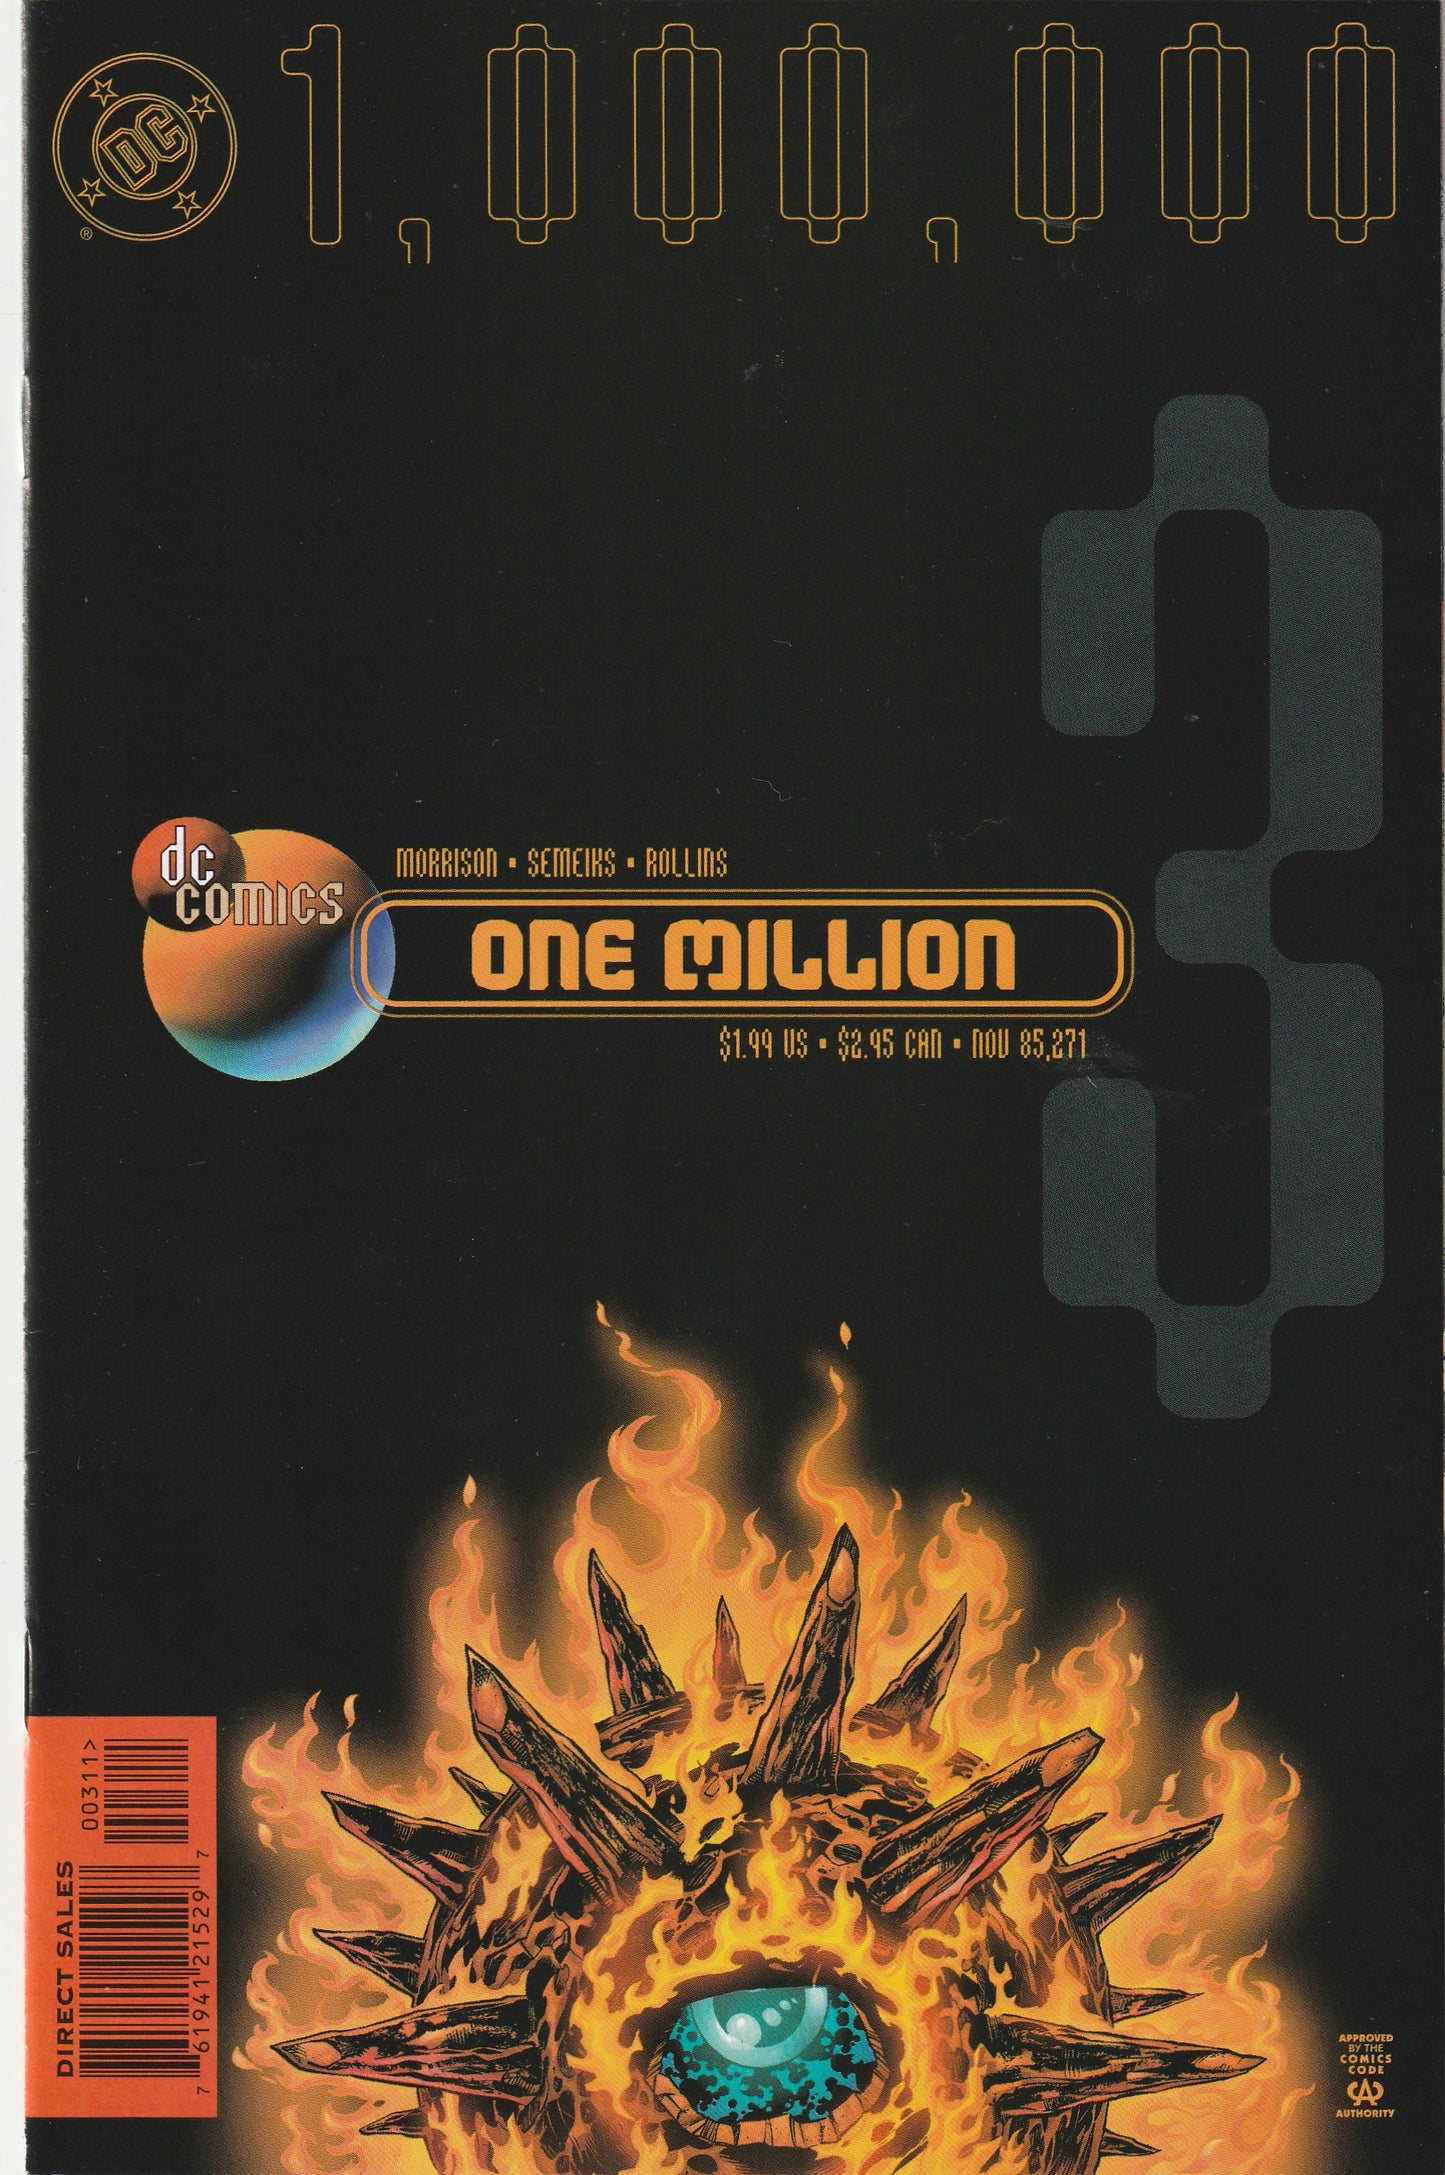 DC One Million (1998) - Complete 4 issue mini-series